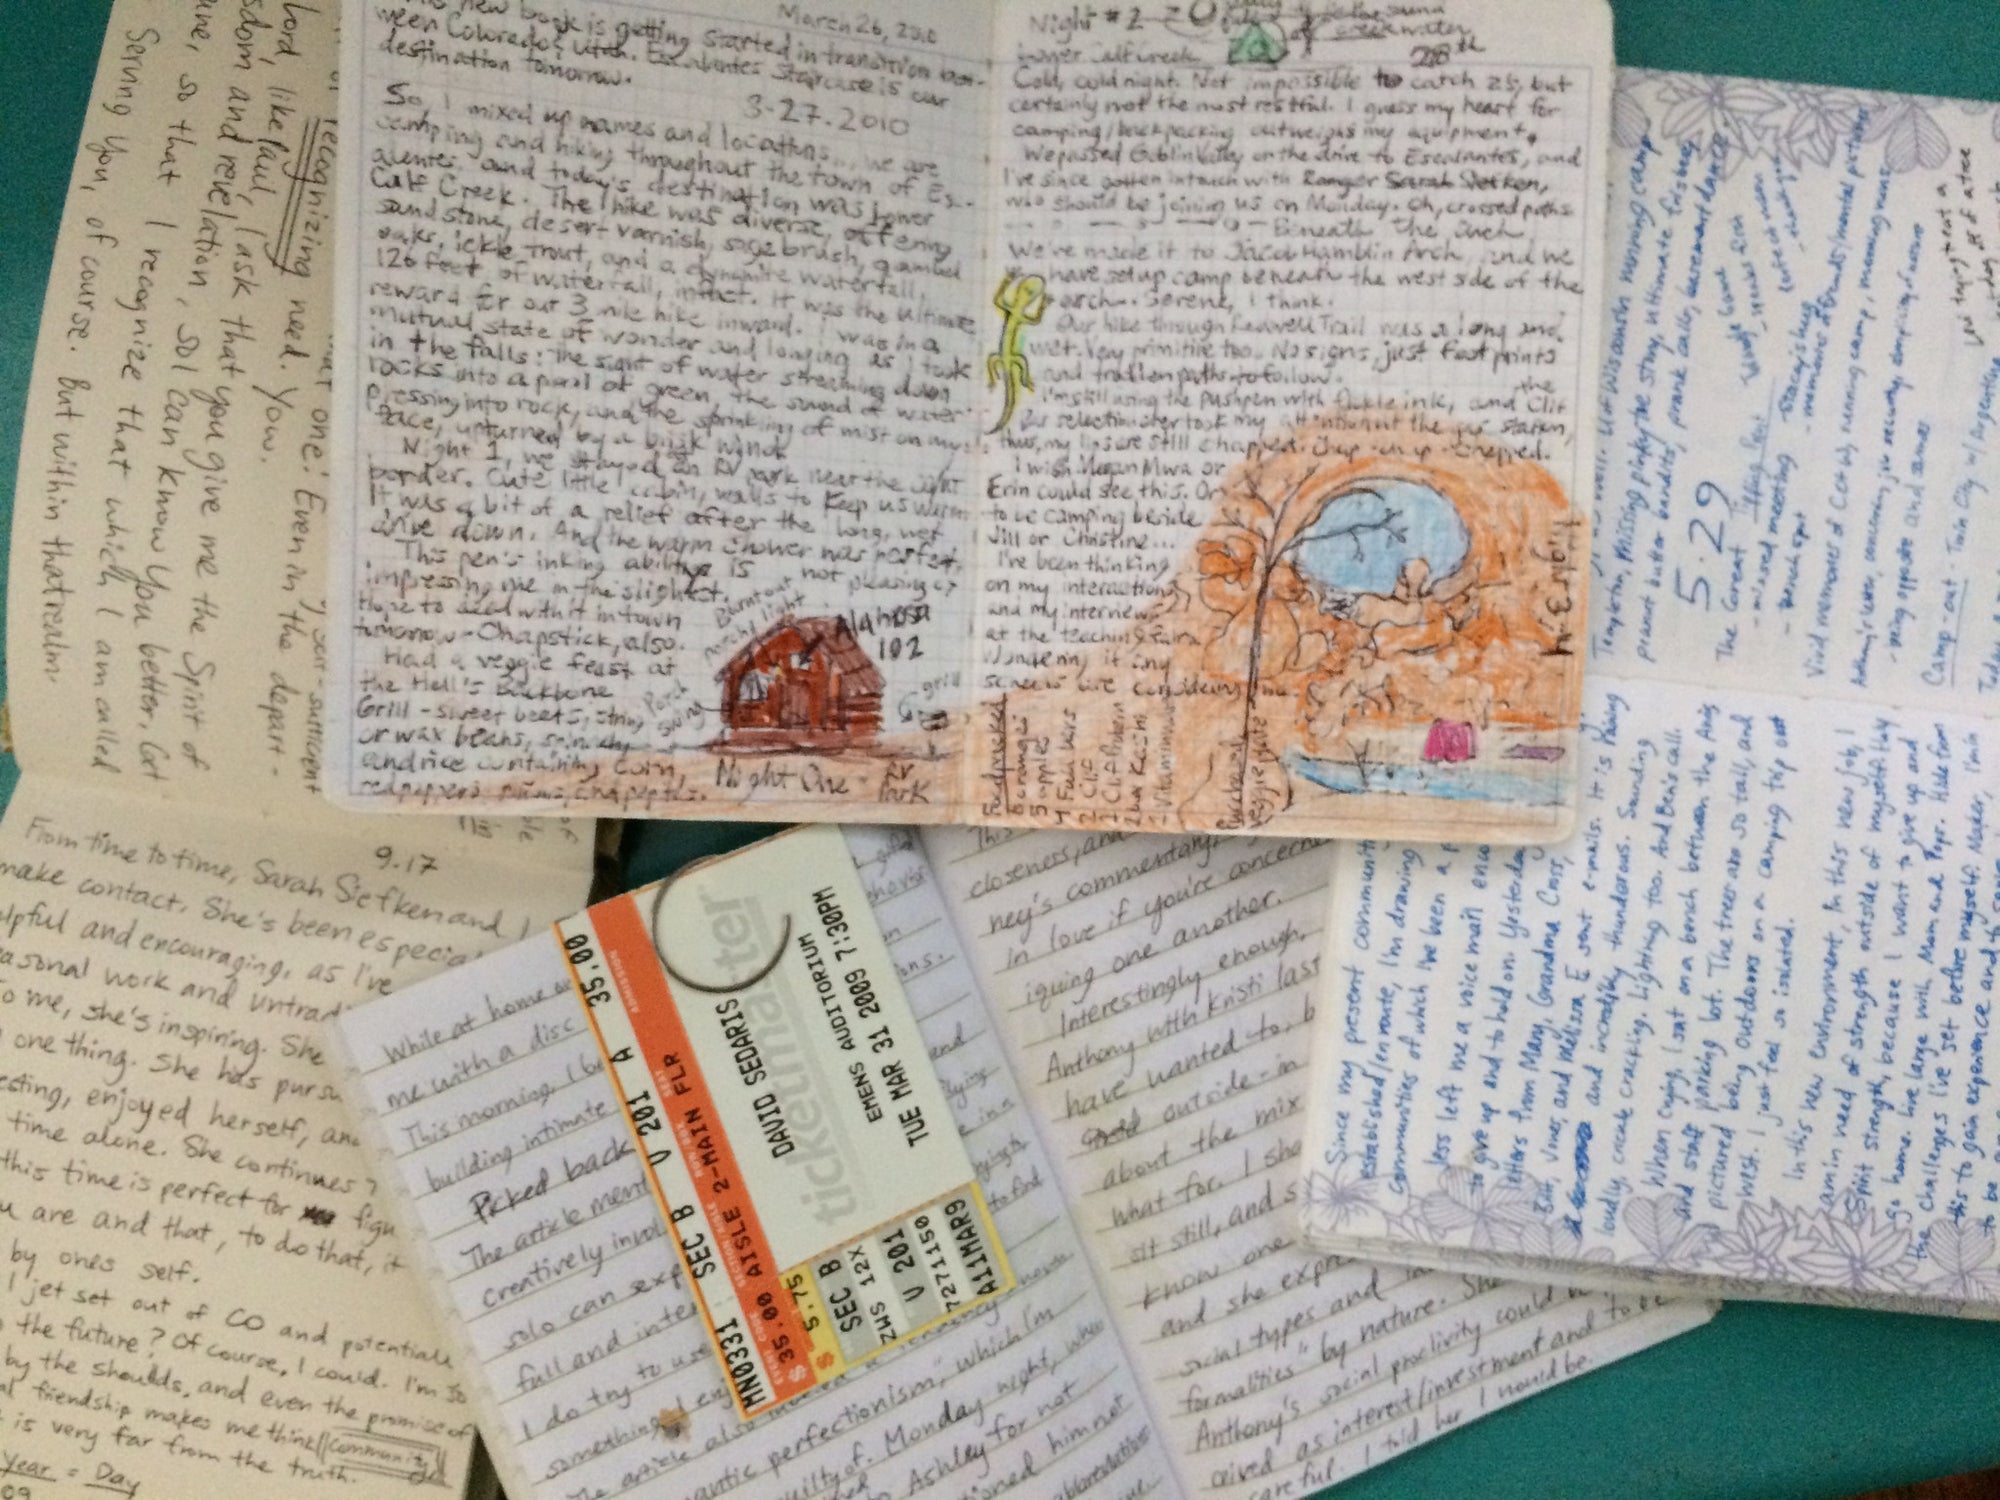 Adventures in Journaling with our Guest Blogger: Laura Knepler